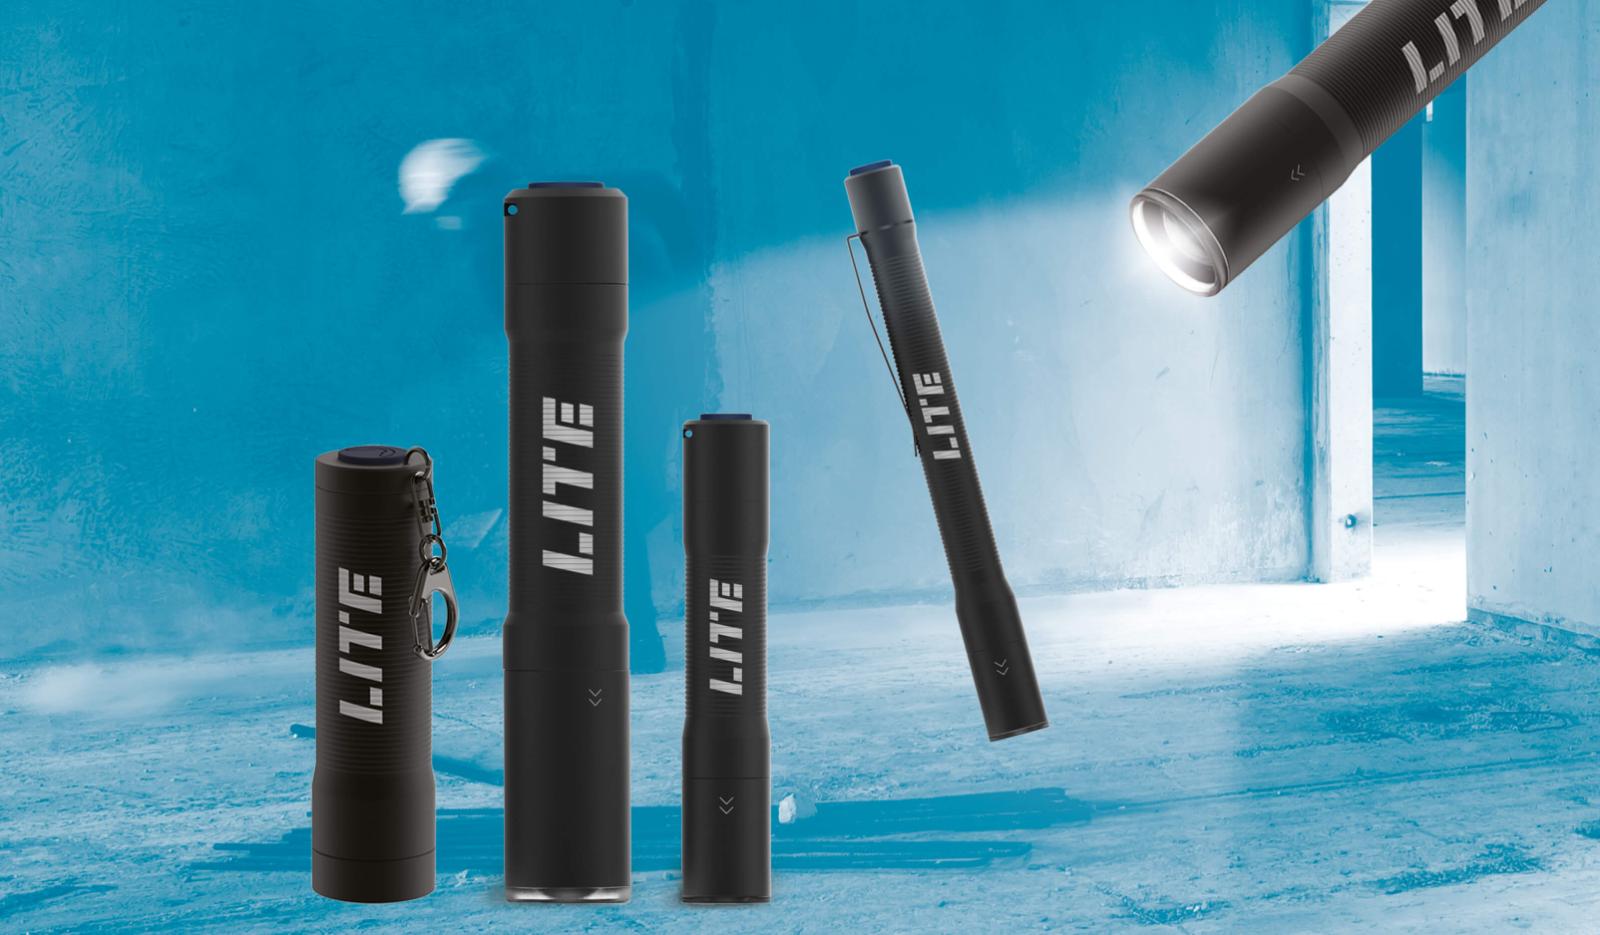 High-quality flashlights at a very competitive price